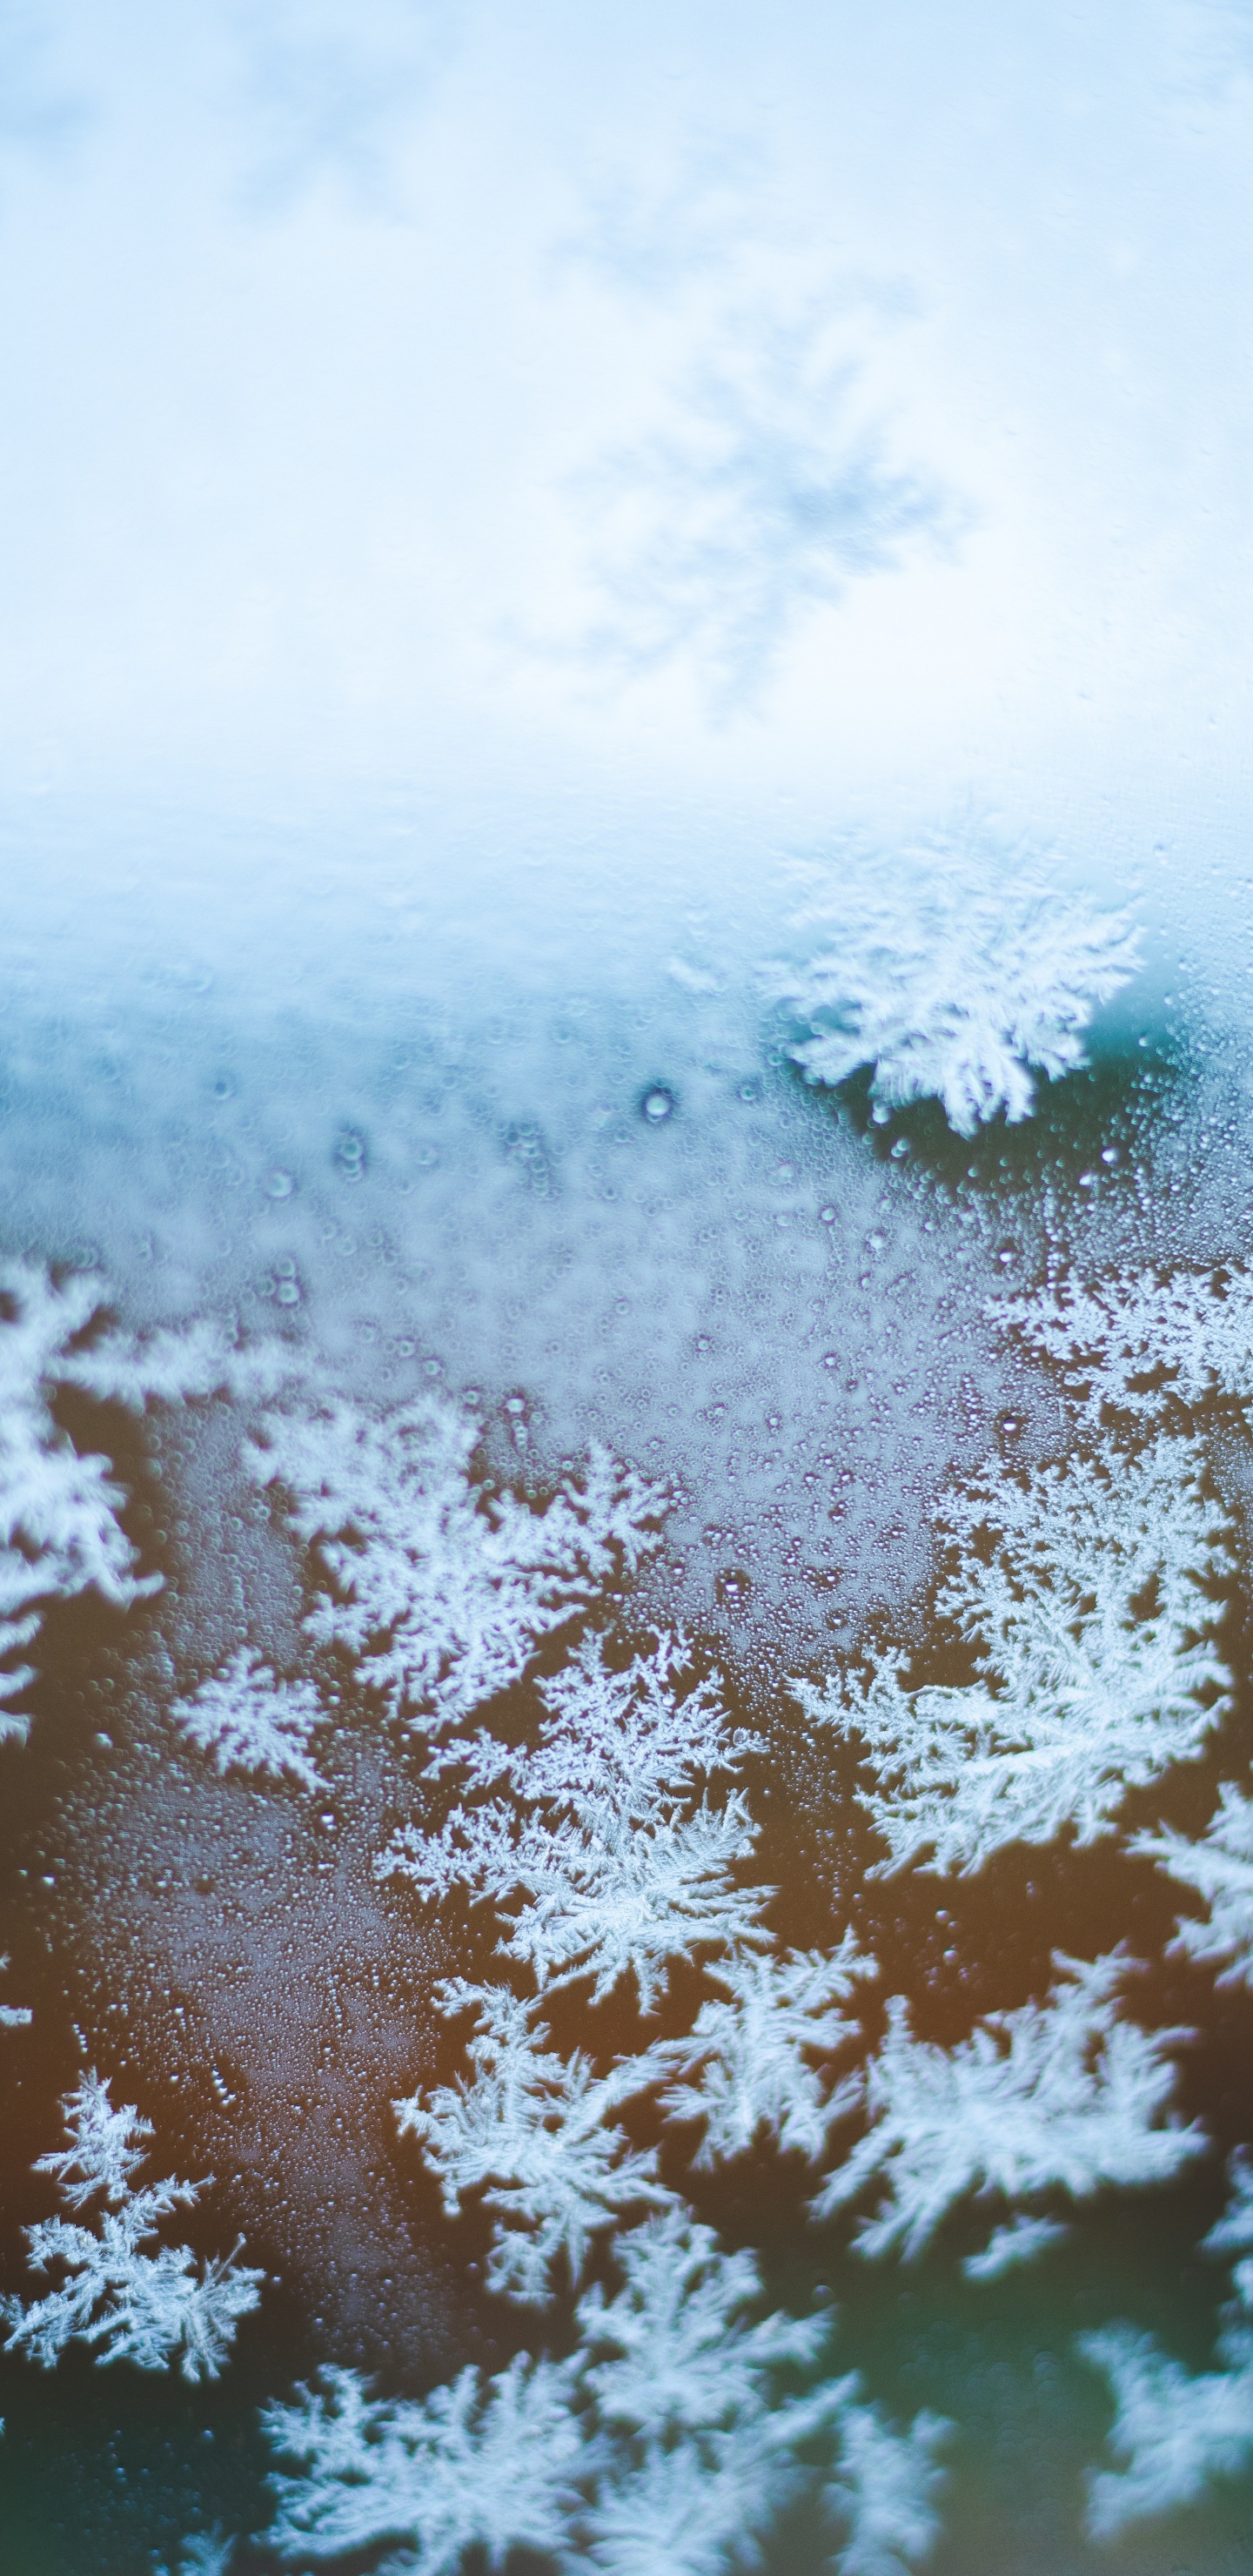 Snowflake, Freezing, Winter, Snow, Frost. Wallpaper in 1440x2960 Resolution